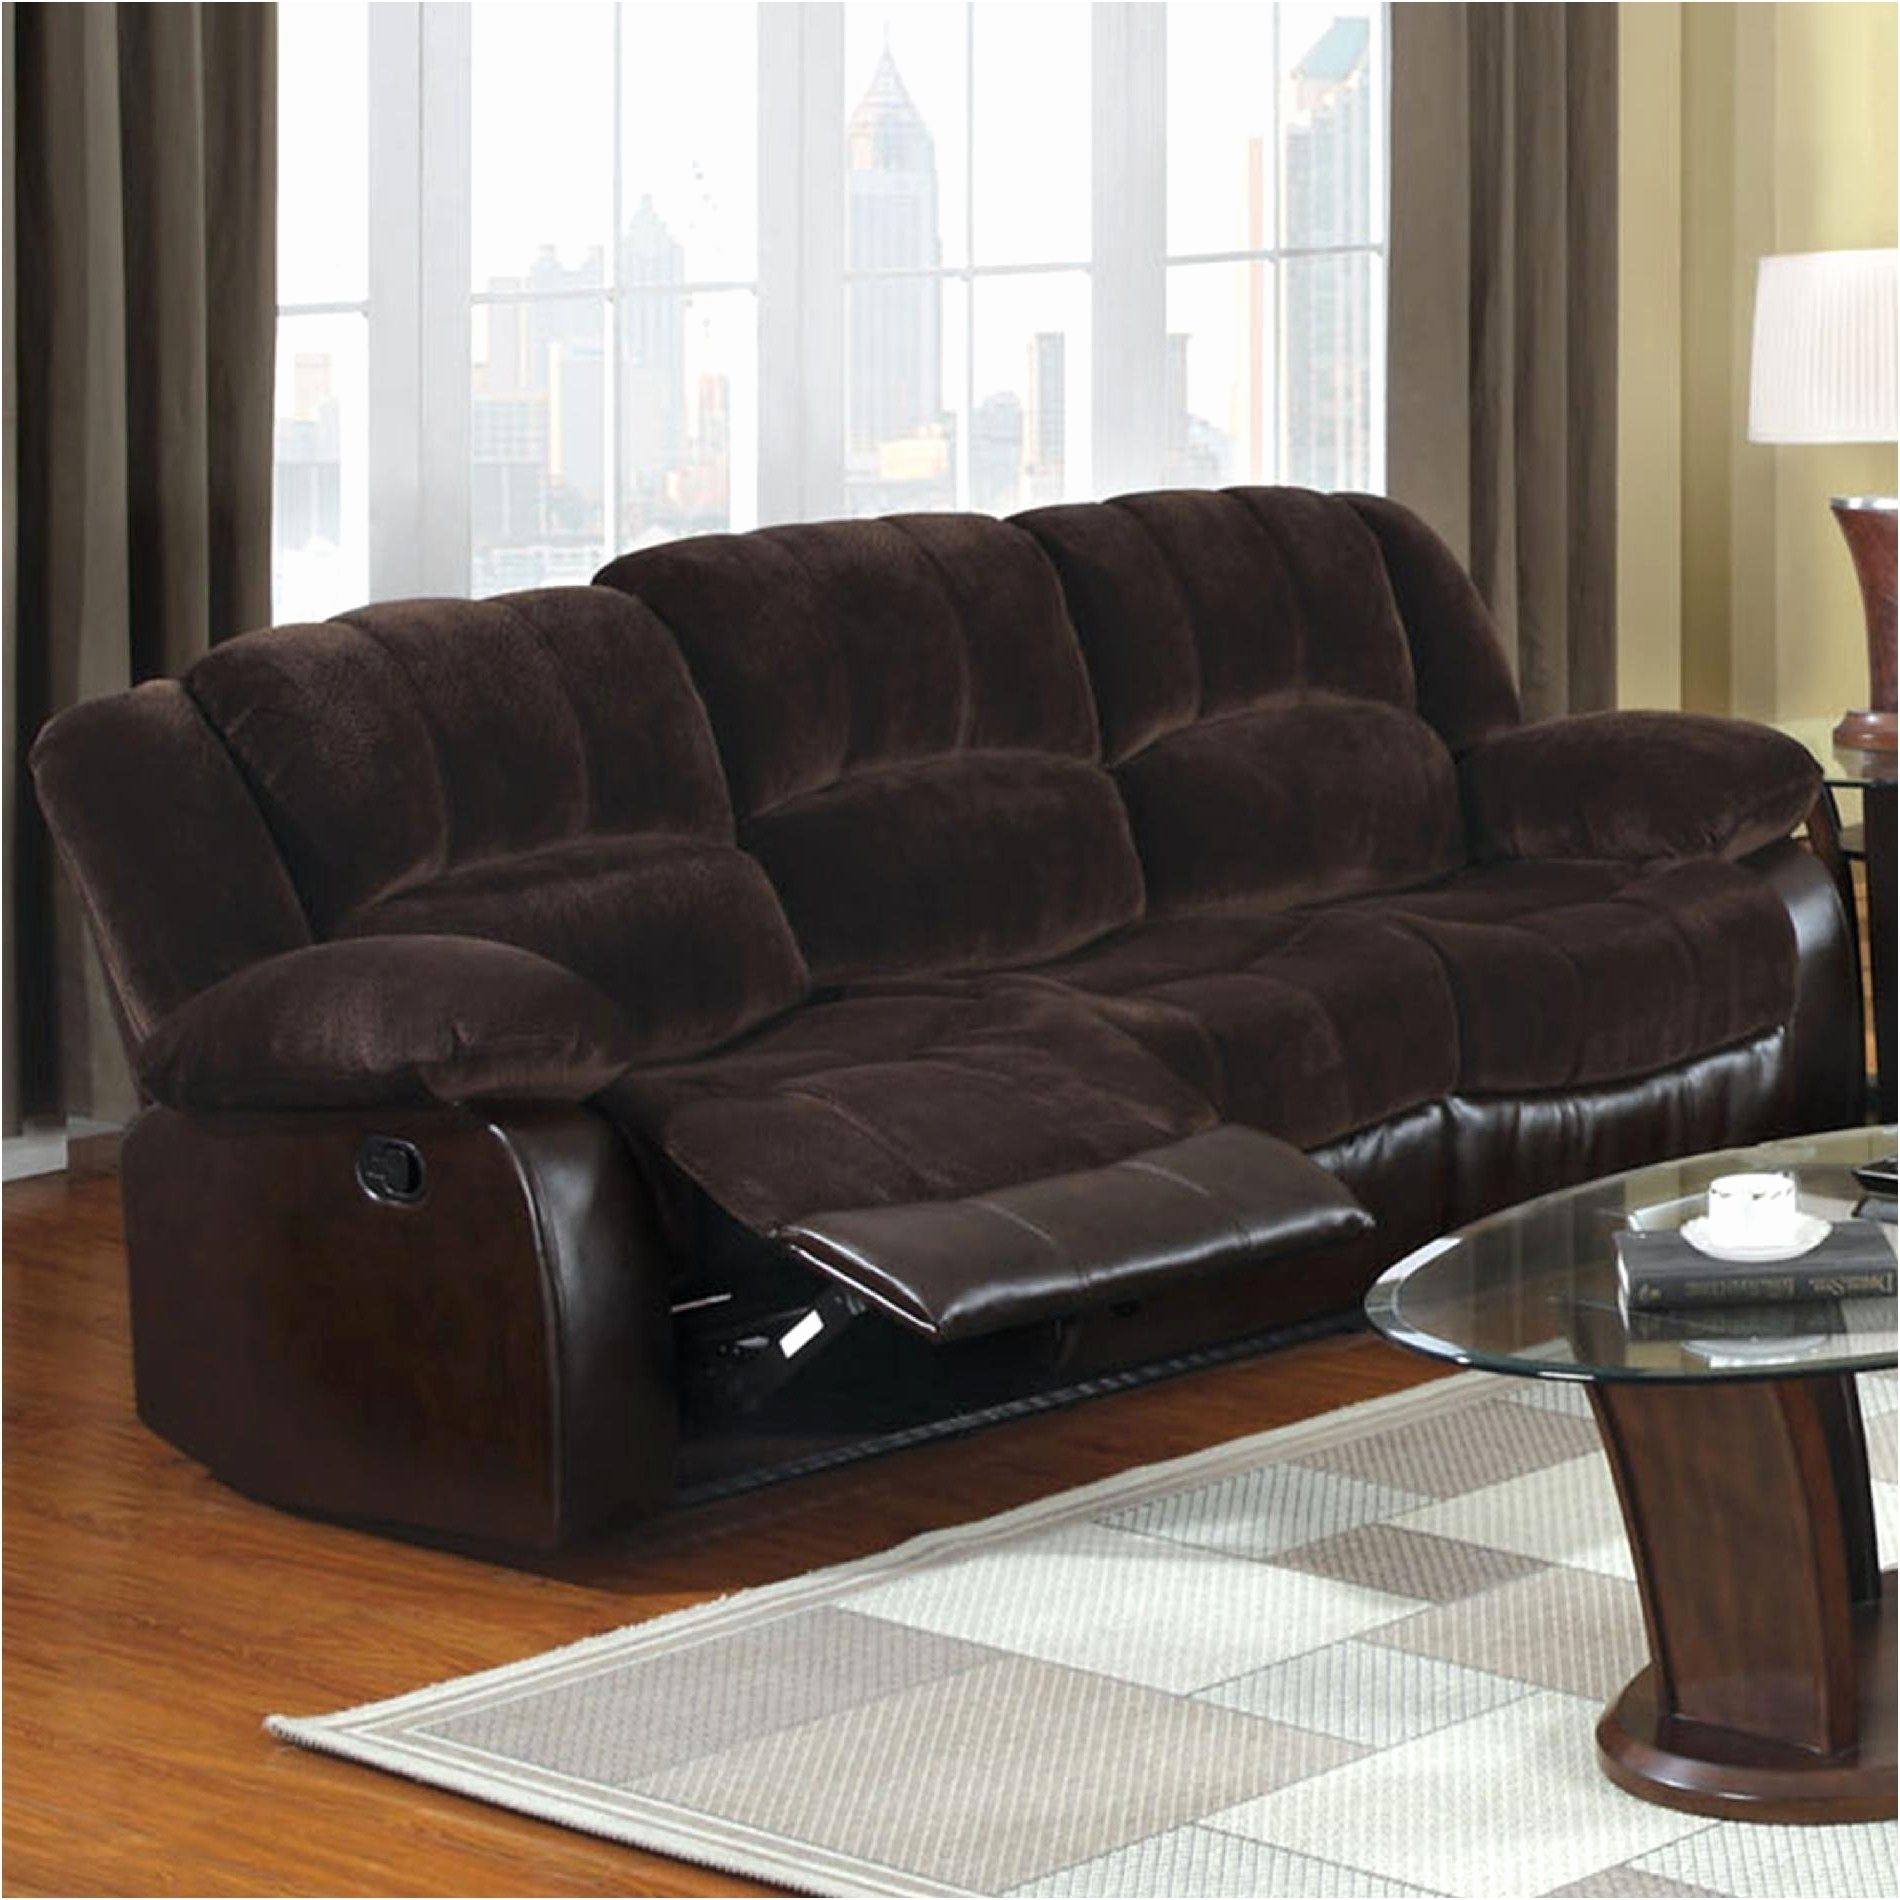 Fresh Sears Leather Sofa New – Intuisiblog For Sears Sofas (View 2 of 10)